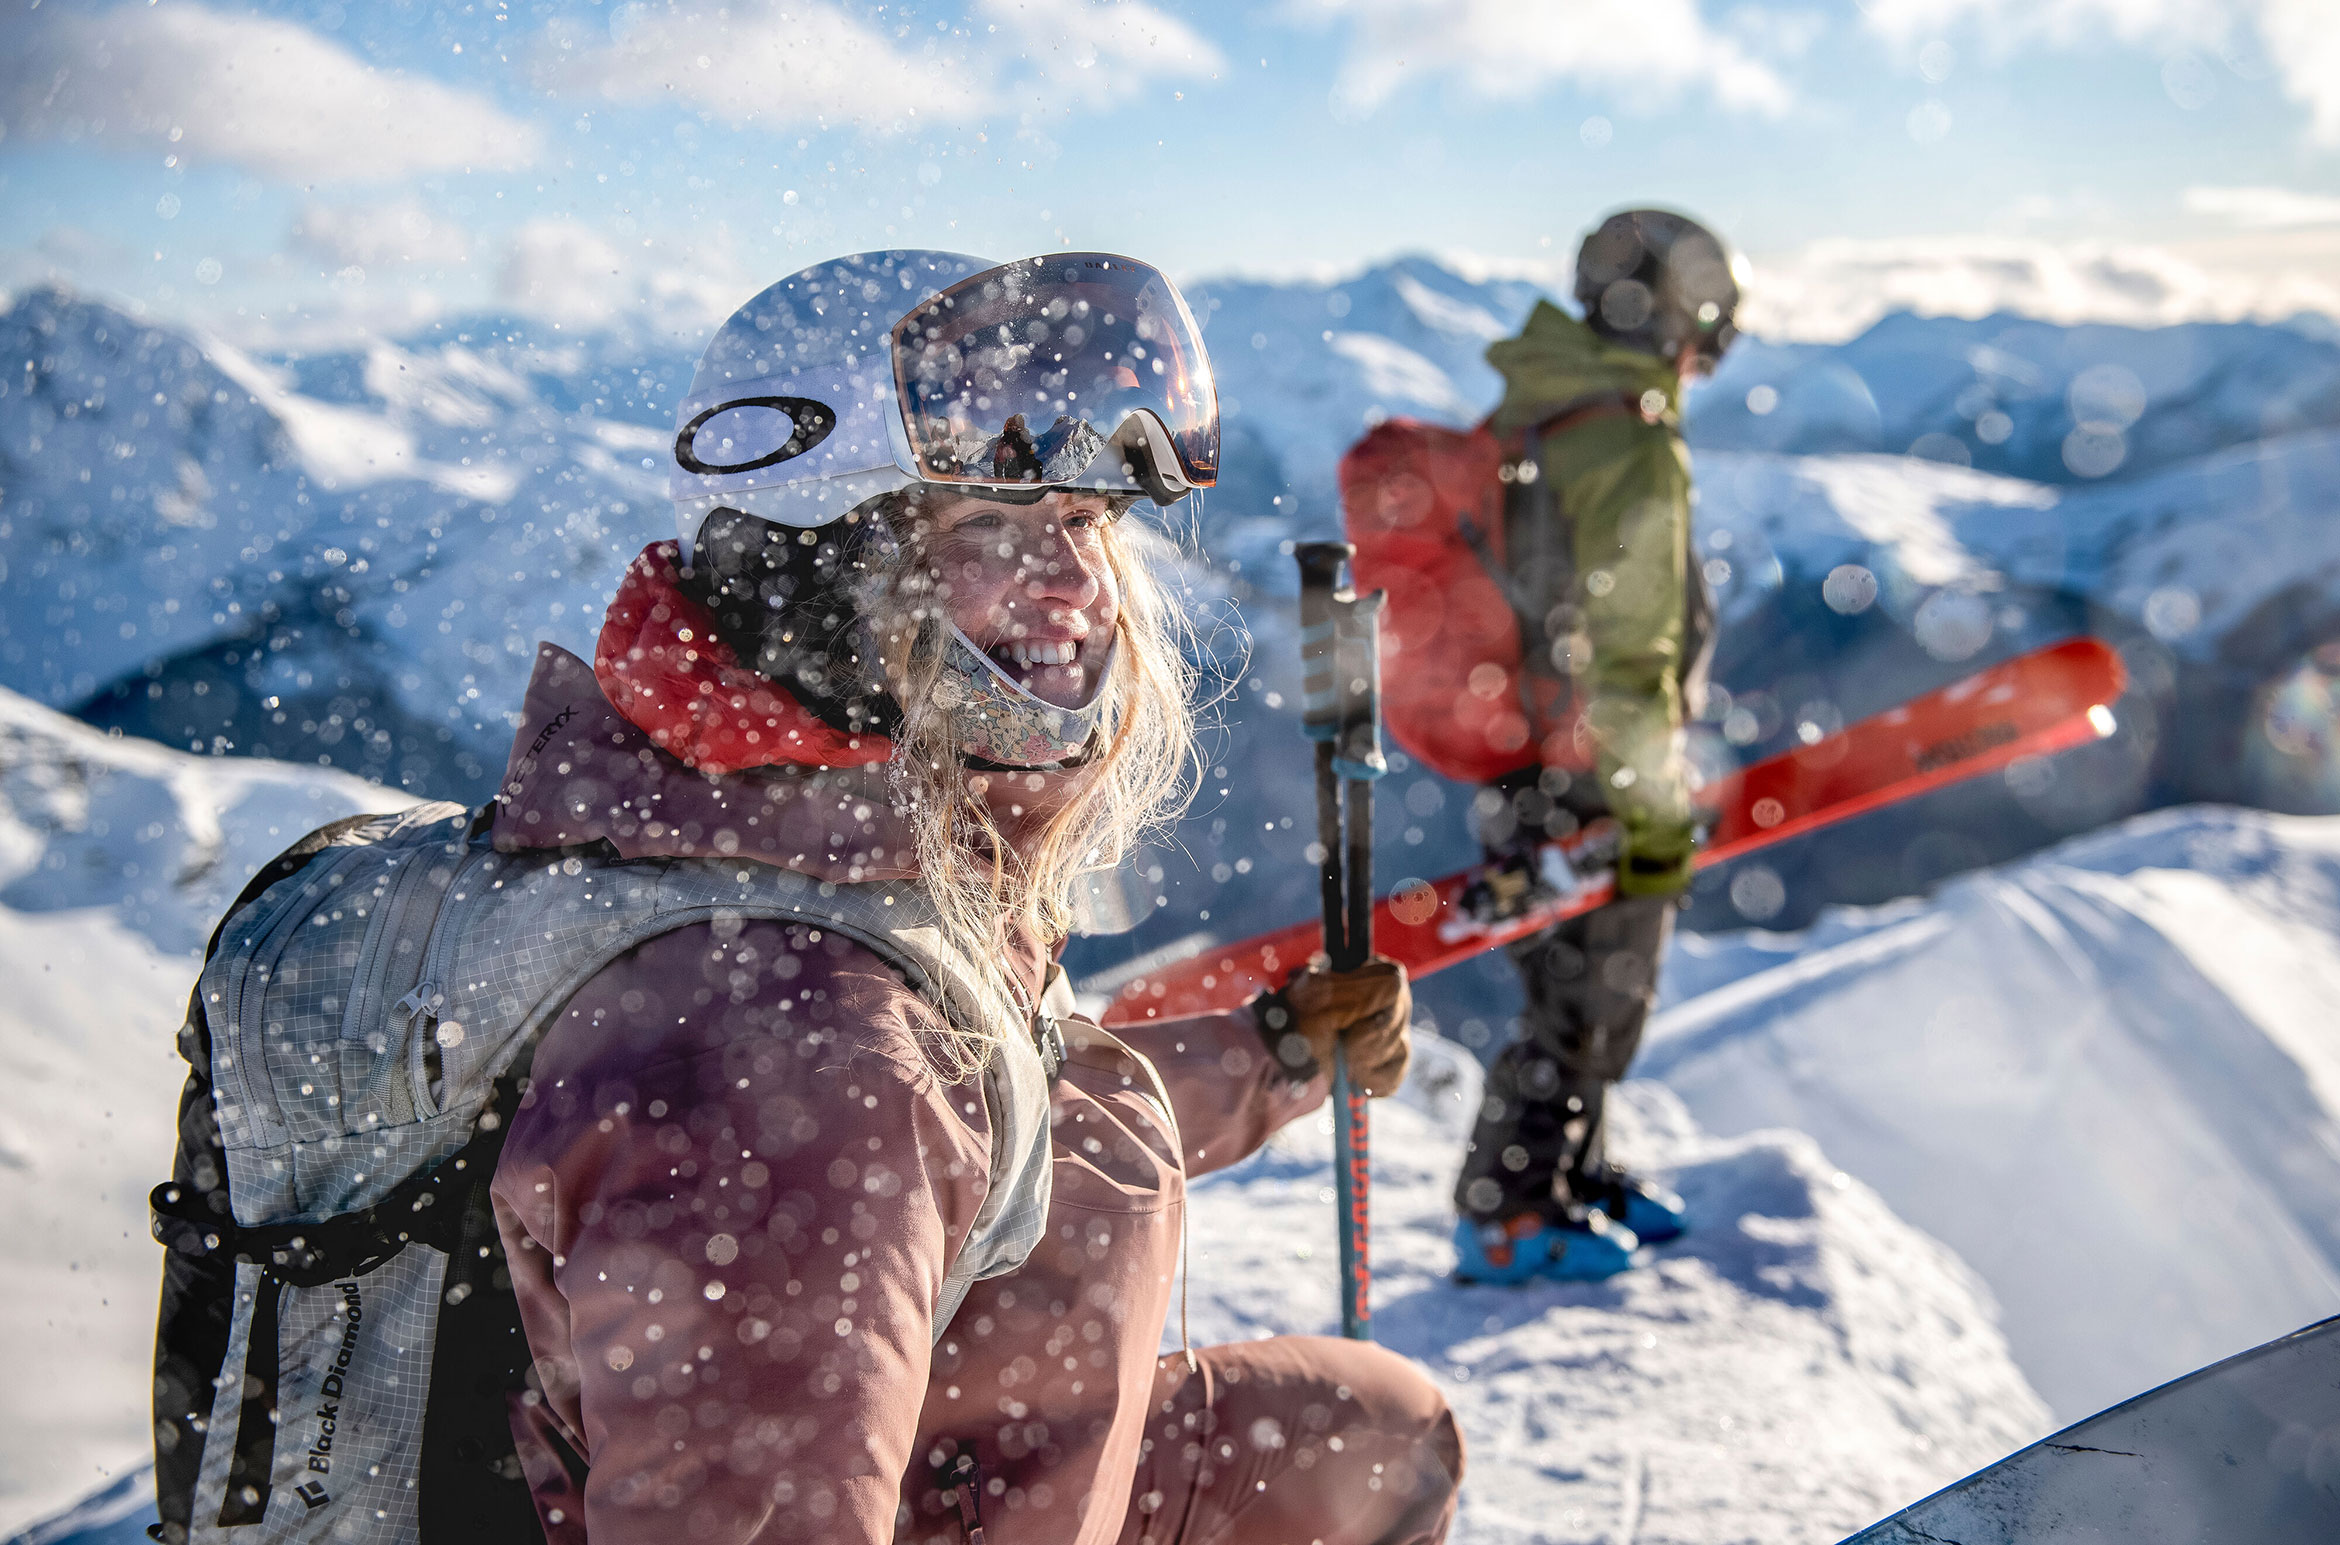 Local Tips for a Winter Ski Trip to Whistler